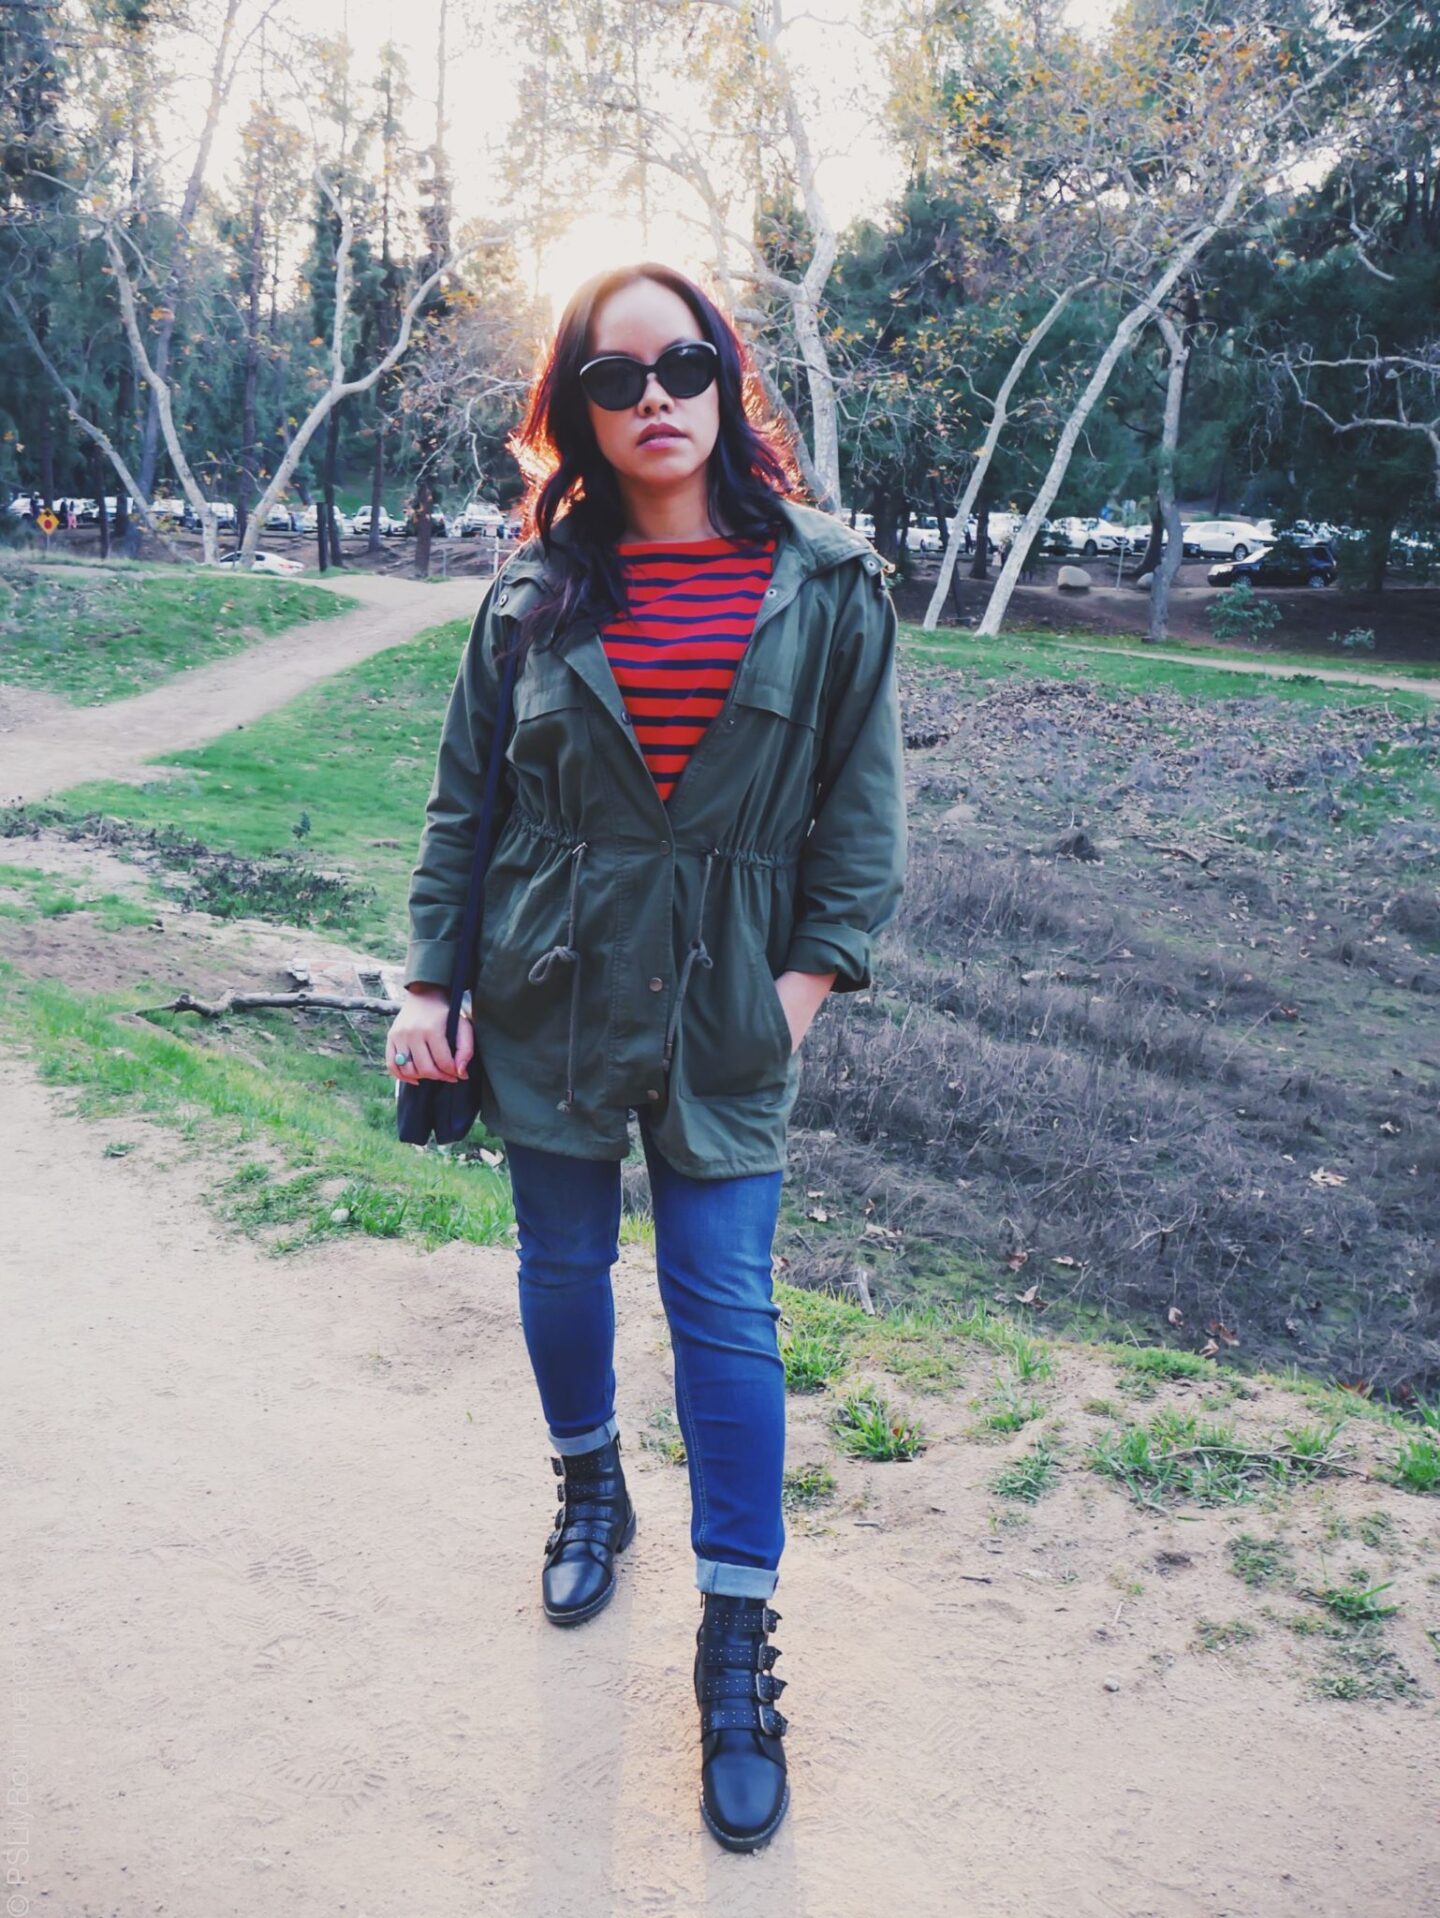 Instagram: @pslilyboutique, pinterest, Los Angeles fashion blogger, top fashion blog, fashion & personal style blog, travel blogger, LA fashion blogger, pslilyboutique-losangeles-fashion-blogger-a-fashion-and-personal-style-blog-jcrew-red-and-blue-stripe-long-sleeve-shirt-winter-2019-outfit-ideas-1-16-19